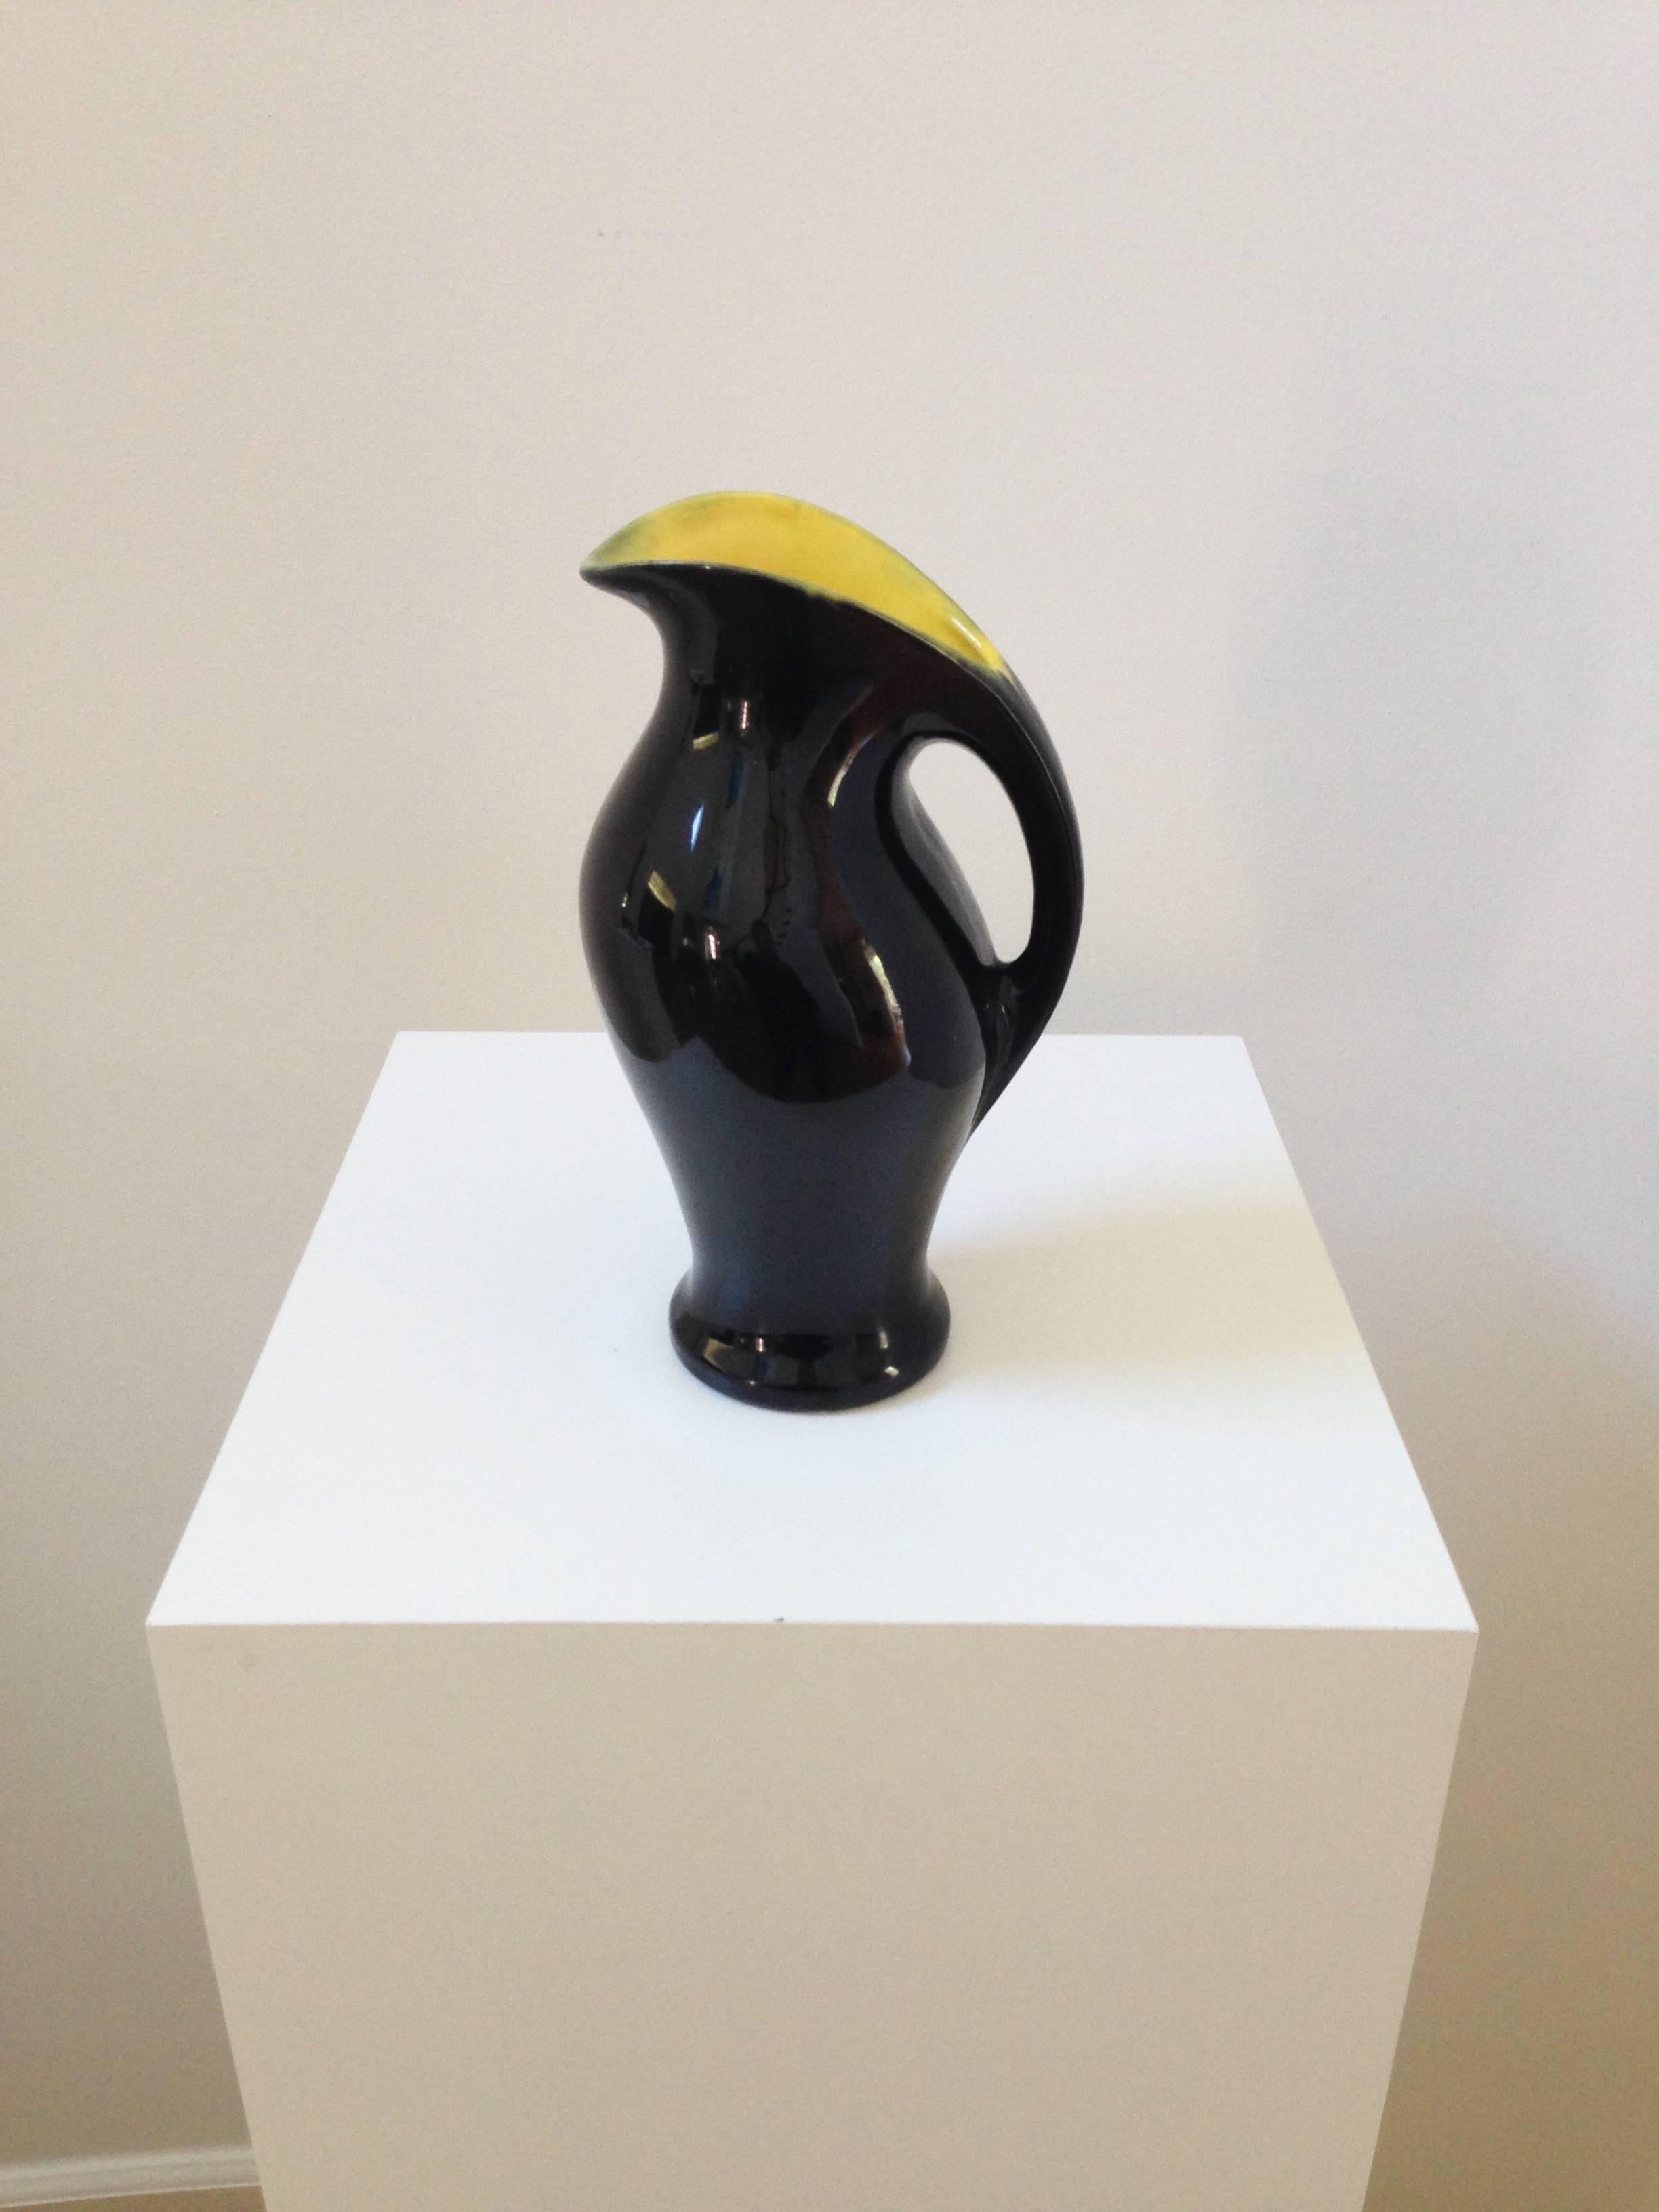 A fabulous modern ceramic pitcher in the style of Pol Chambost. The black exterior has a very nice glaze and sheen to it with a bright yellow interior. Sizable and quite practical for use, the pitcher's sculptural silhouette makes for a very